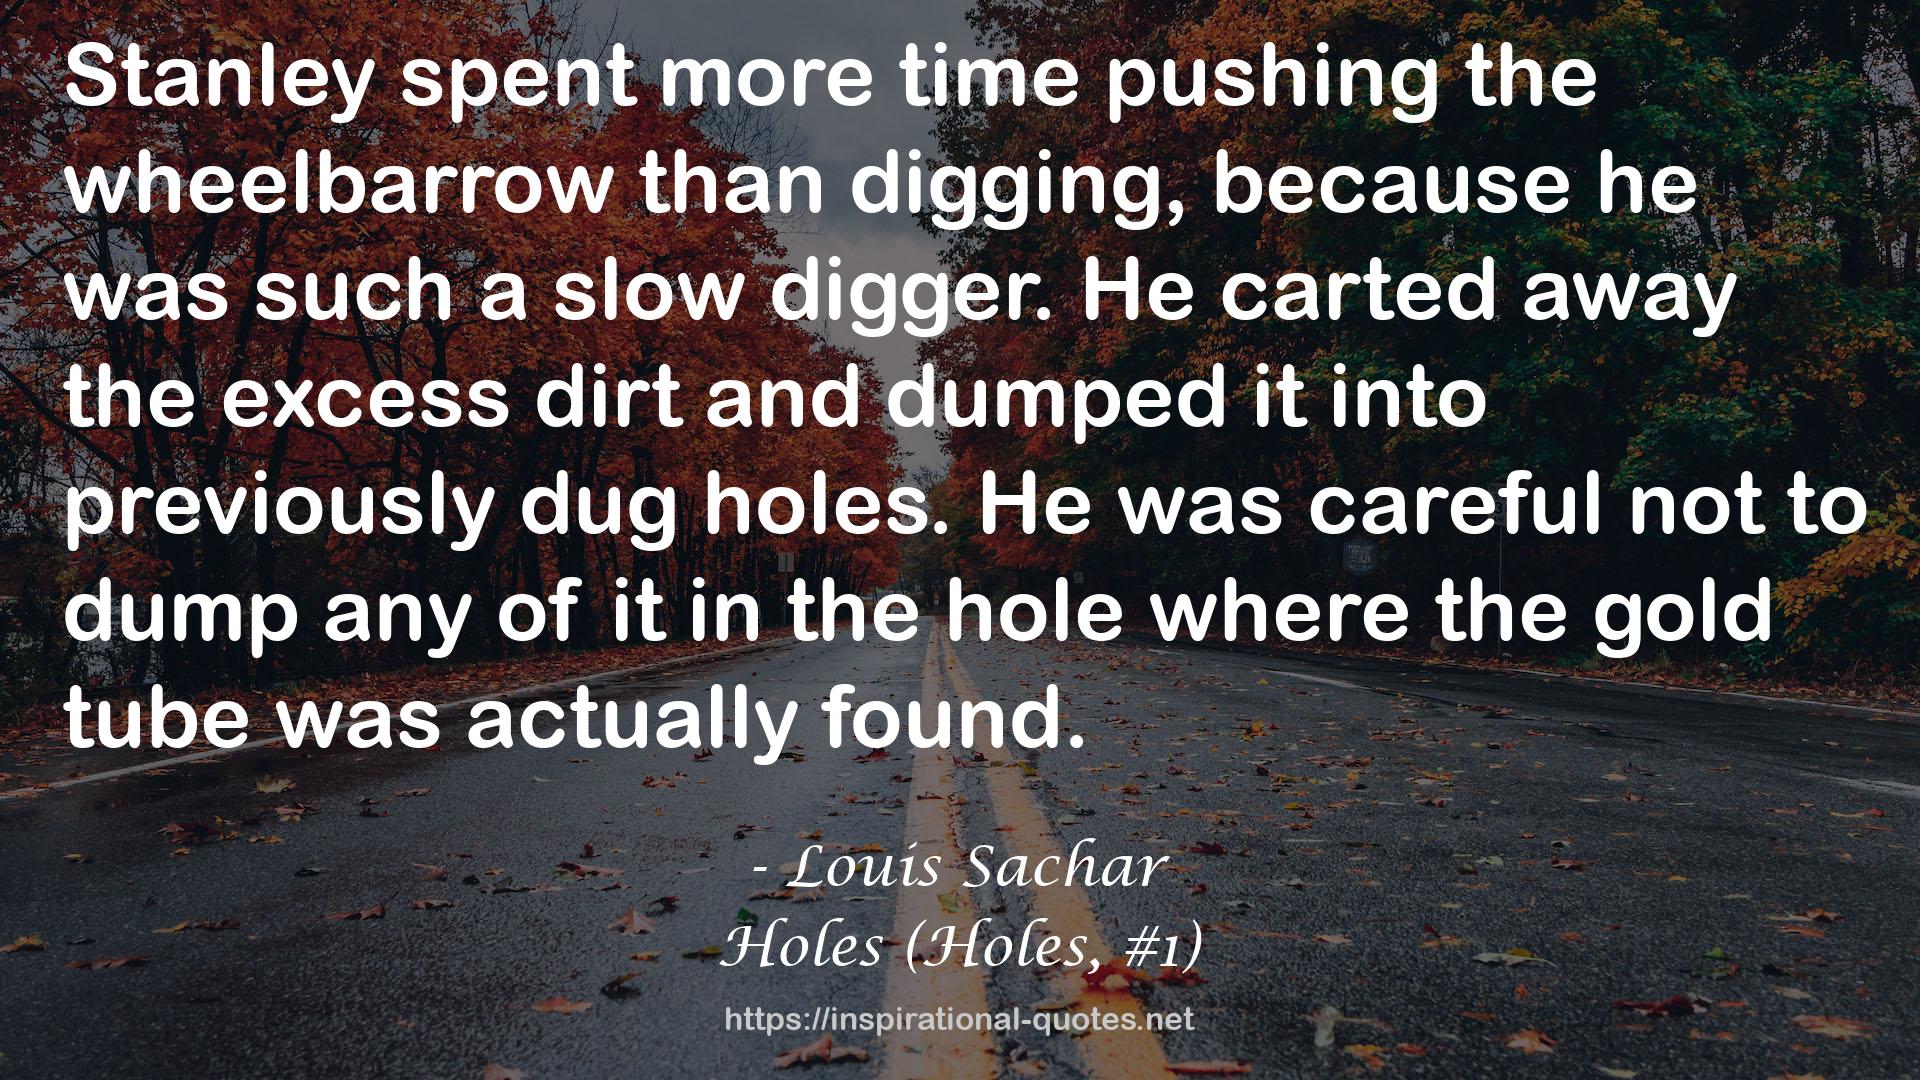 Holes (Holes, #1) QUOTES